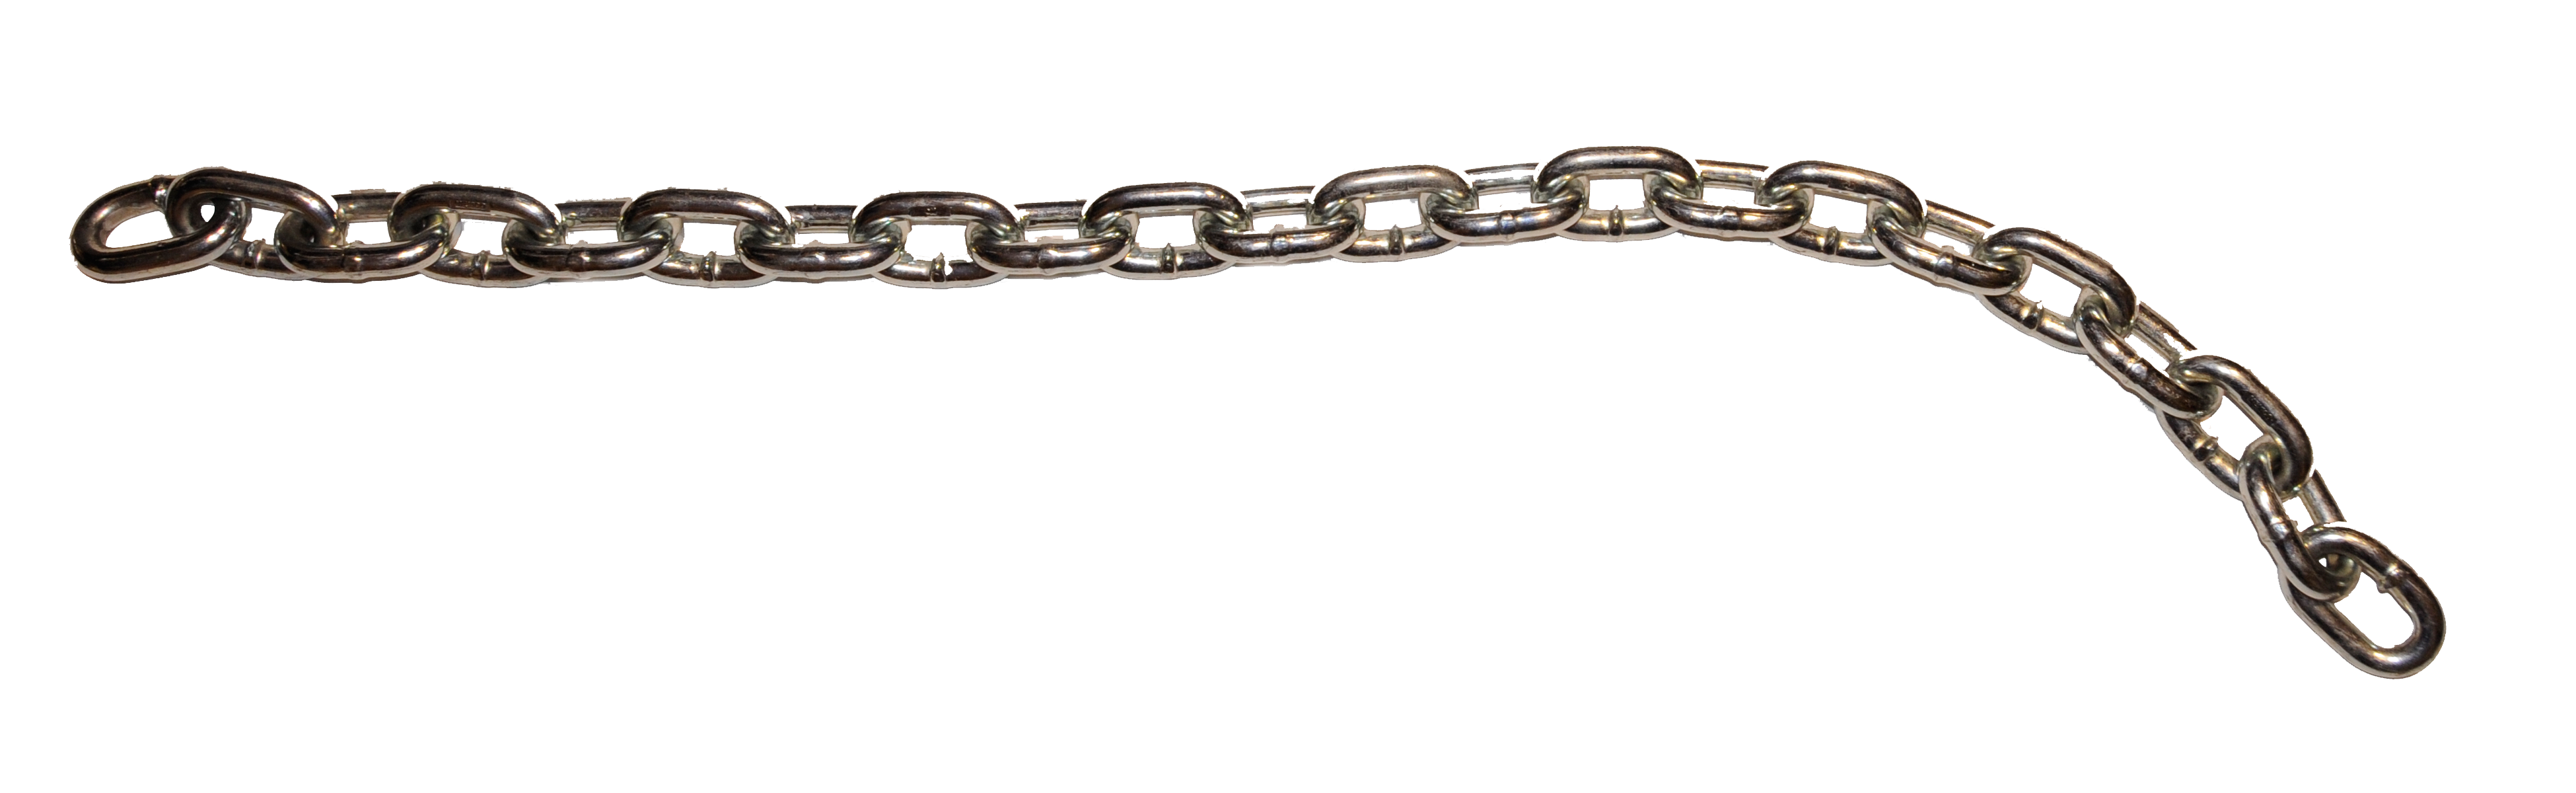 Chain Picture PNG Image